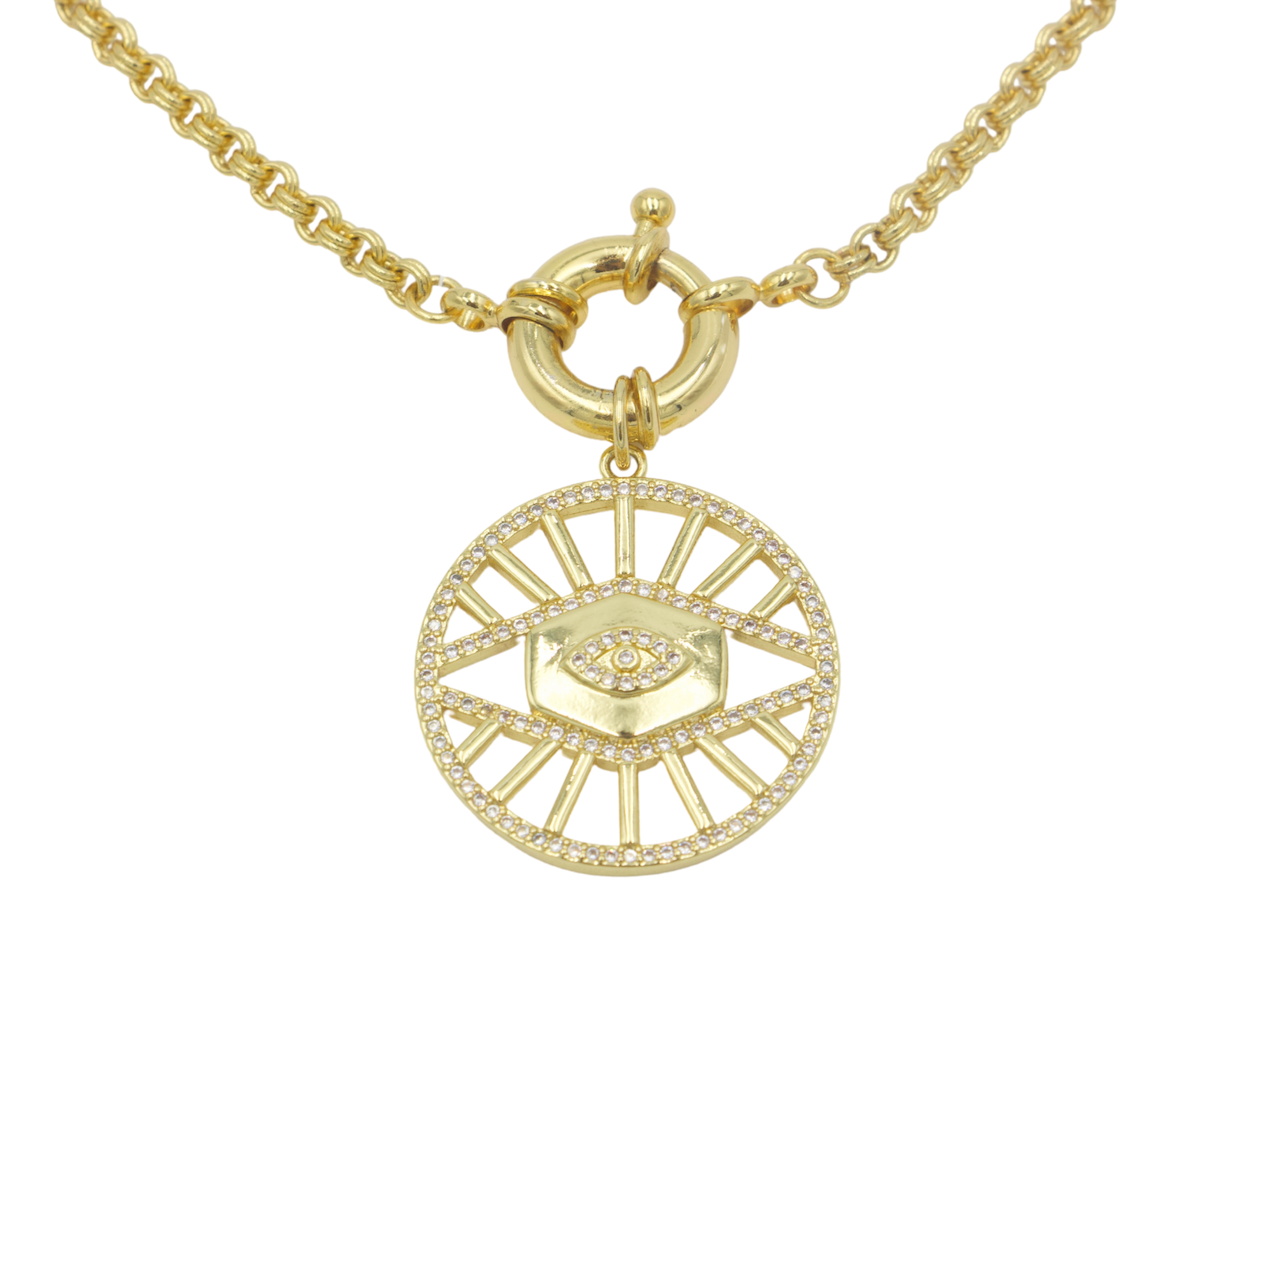 Gold filled evil eye medallion pendant charm necklace. This is a bold gold necklace design. Australian jewellery brand AW Boutique.